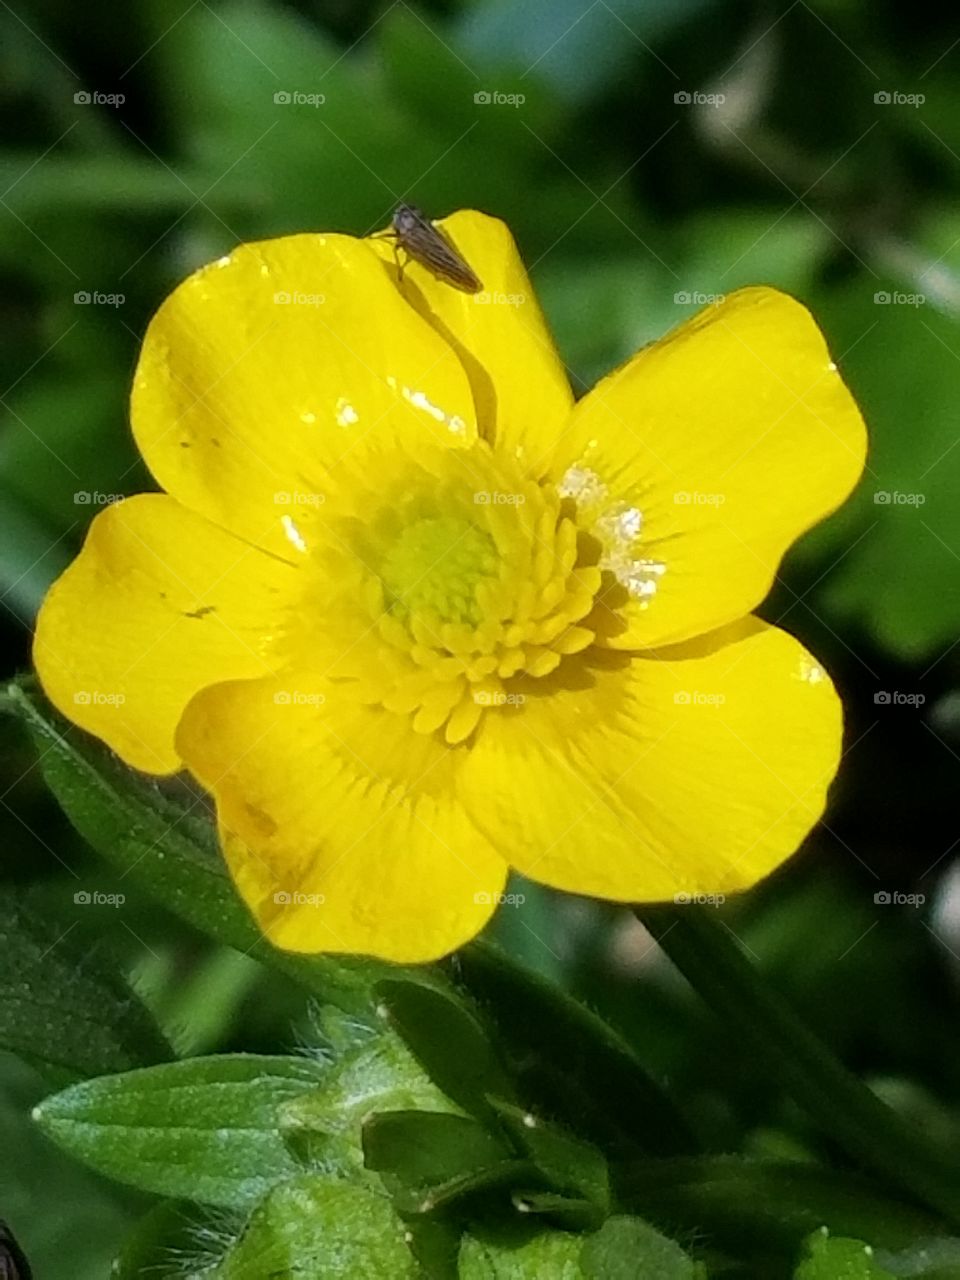 Tiny yellow flowering plant with a tiny insect